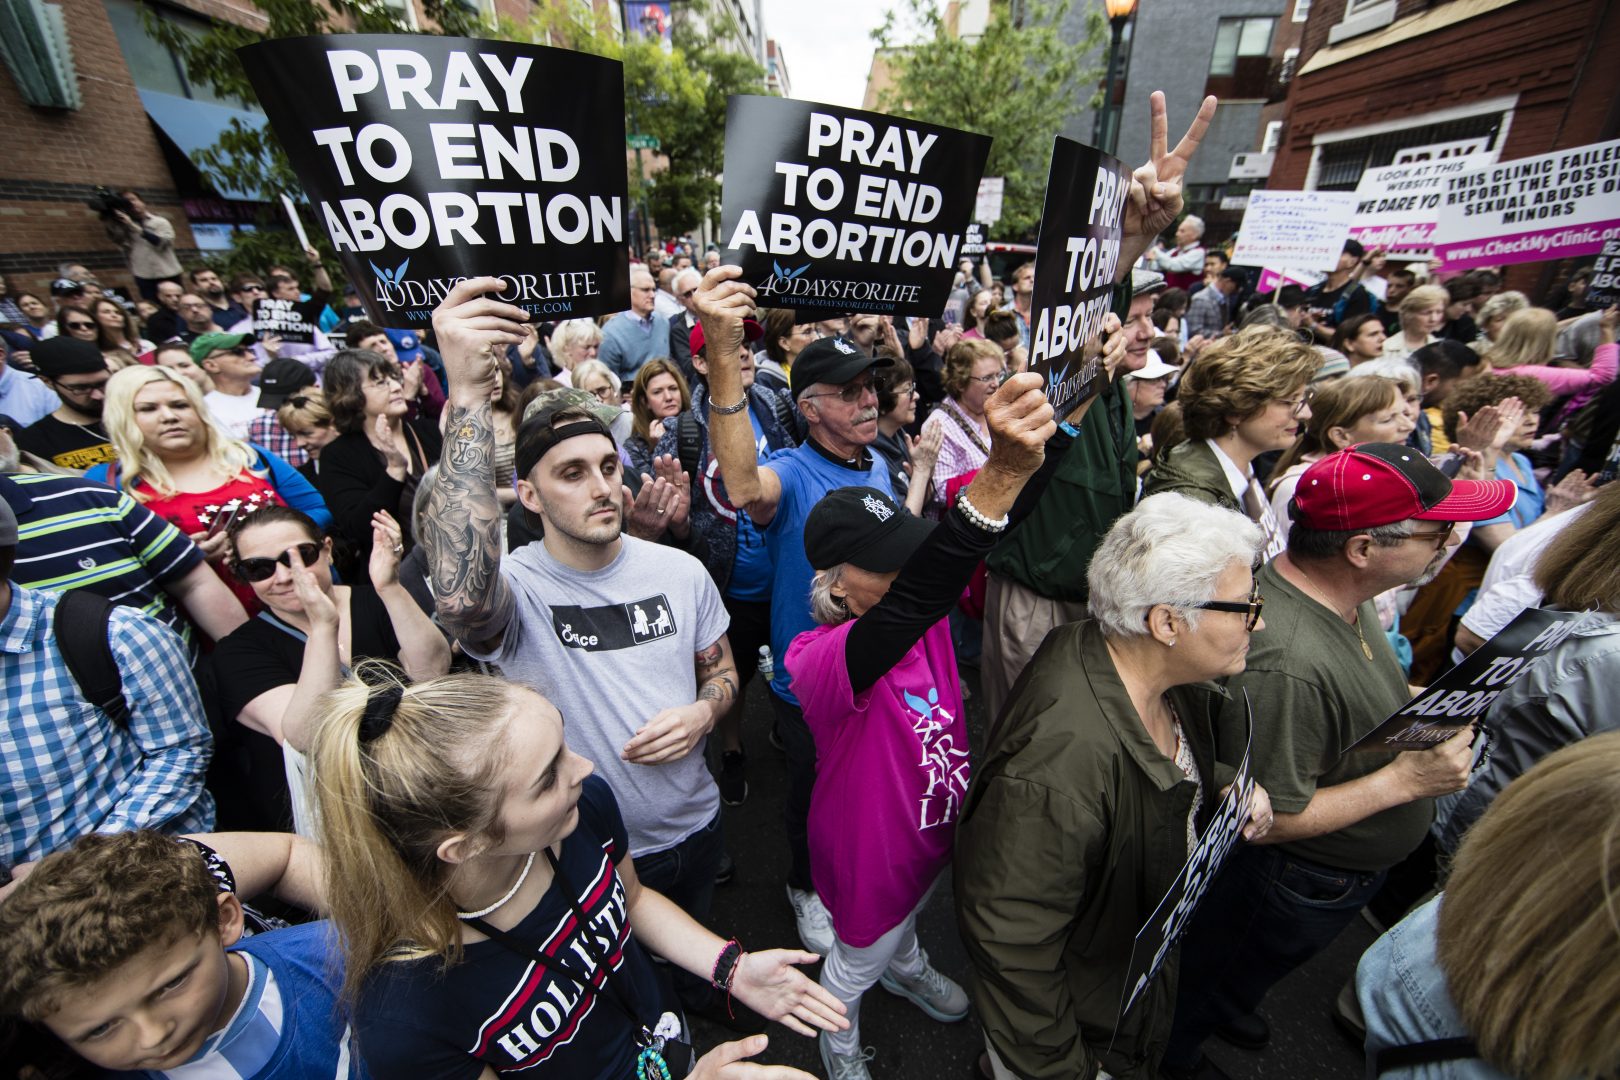 Anti-abortion protesters rally near a Planned Parenthood clinic in Philadelphia, Friday, May 10, 2019.